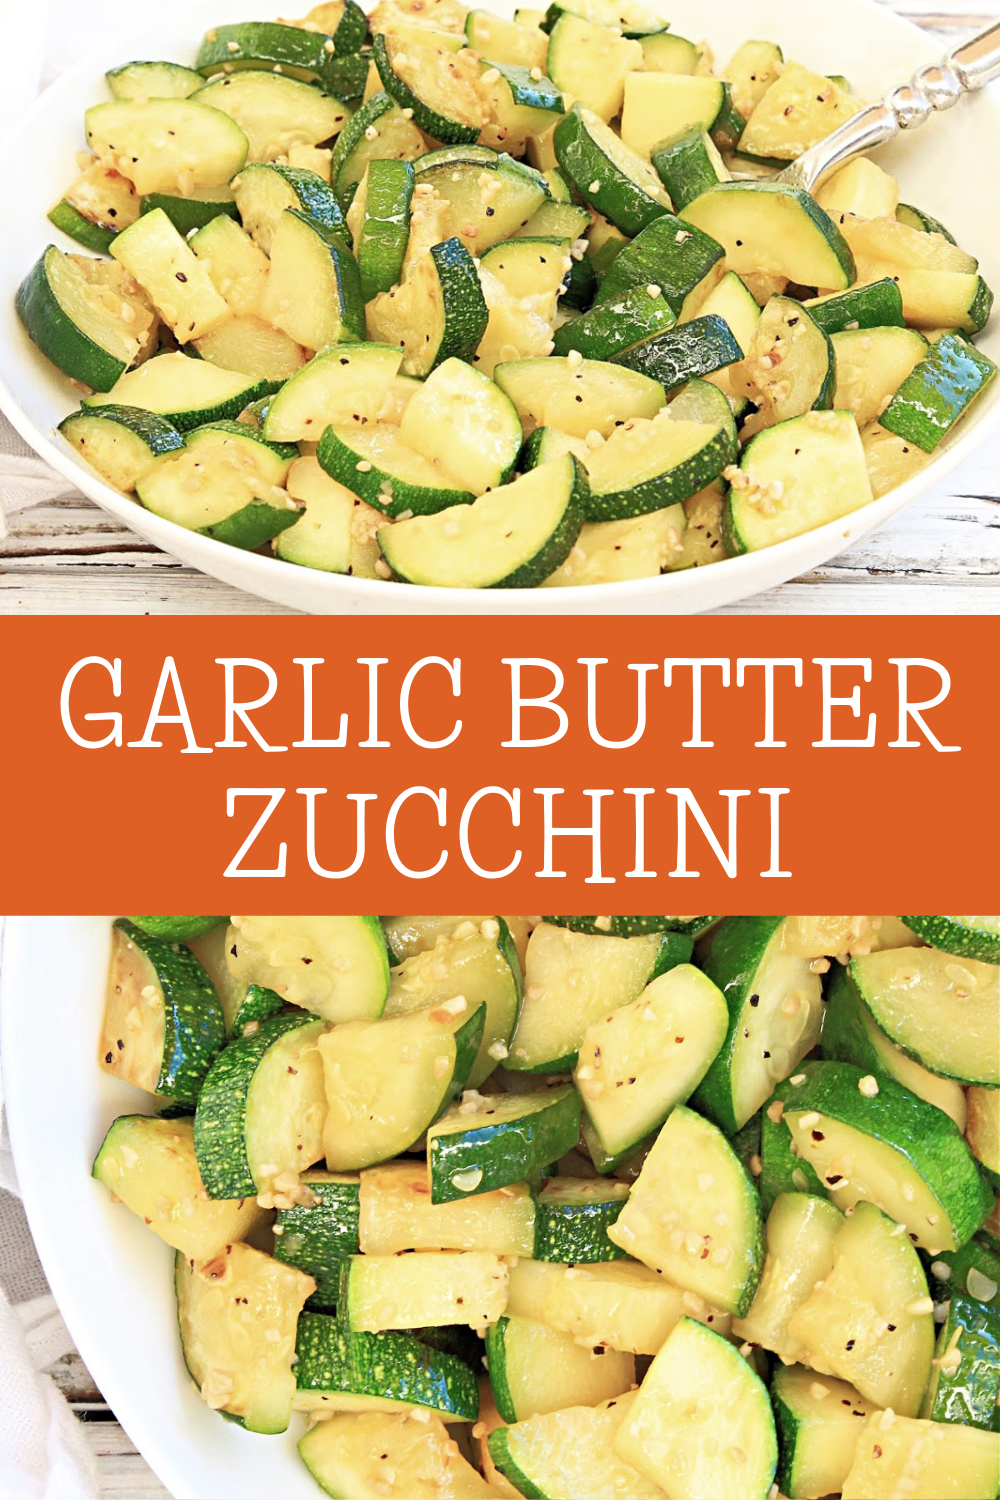 Garlic Butter Zucchini ~ A simple and savory side dish that pairs well with a variety of cuisines. Ready to serve in 10 minutes or less! via @thiswifecooks